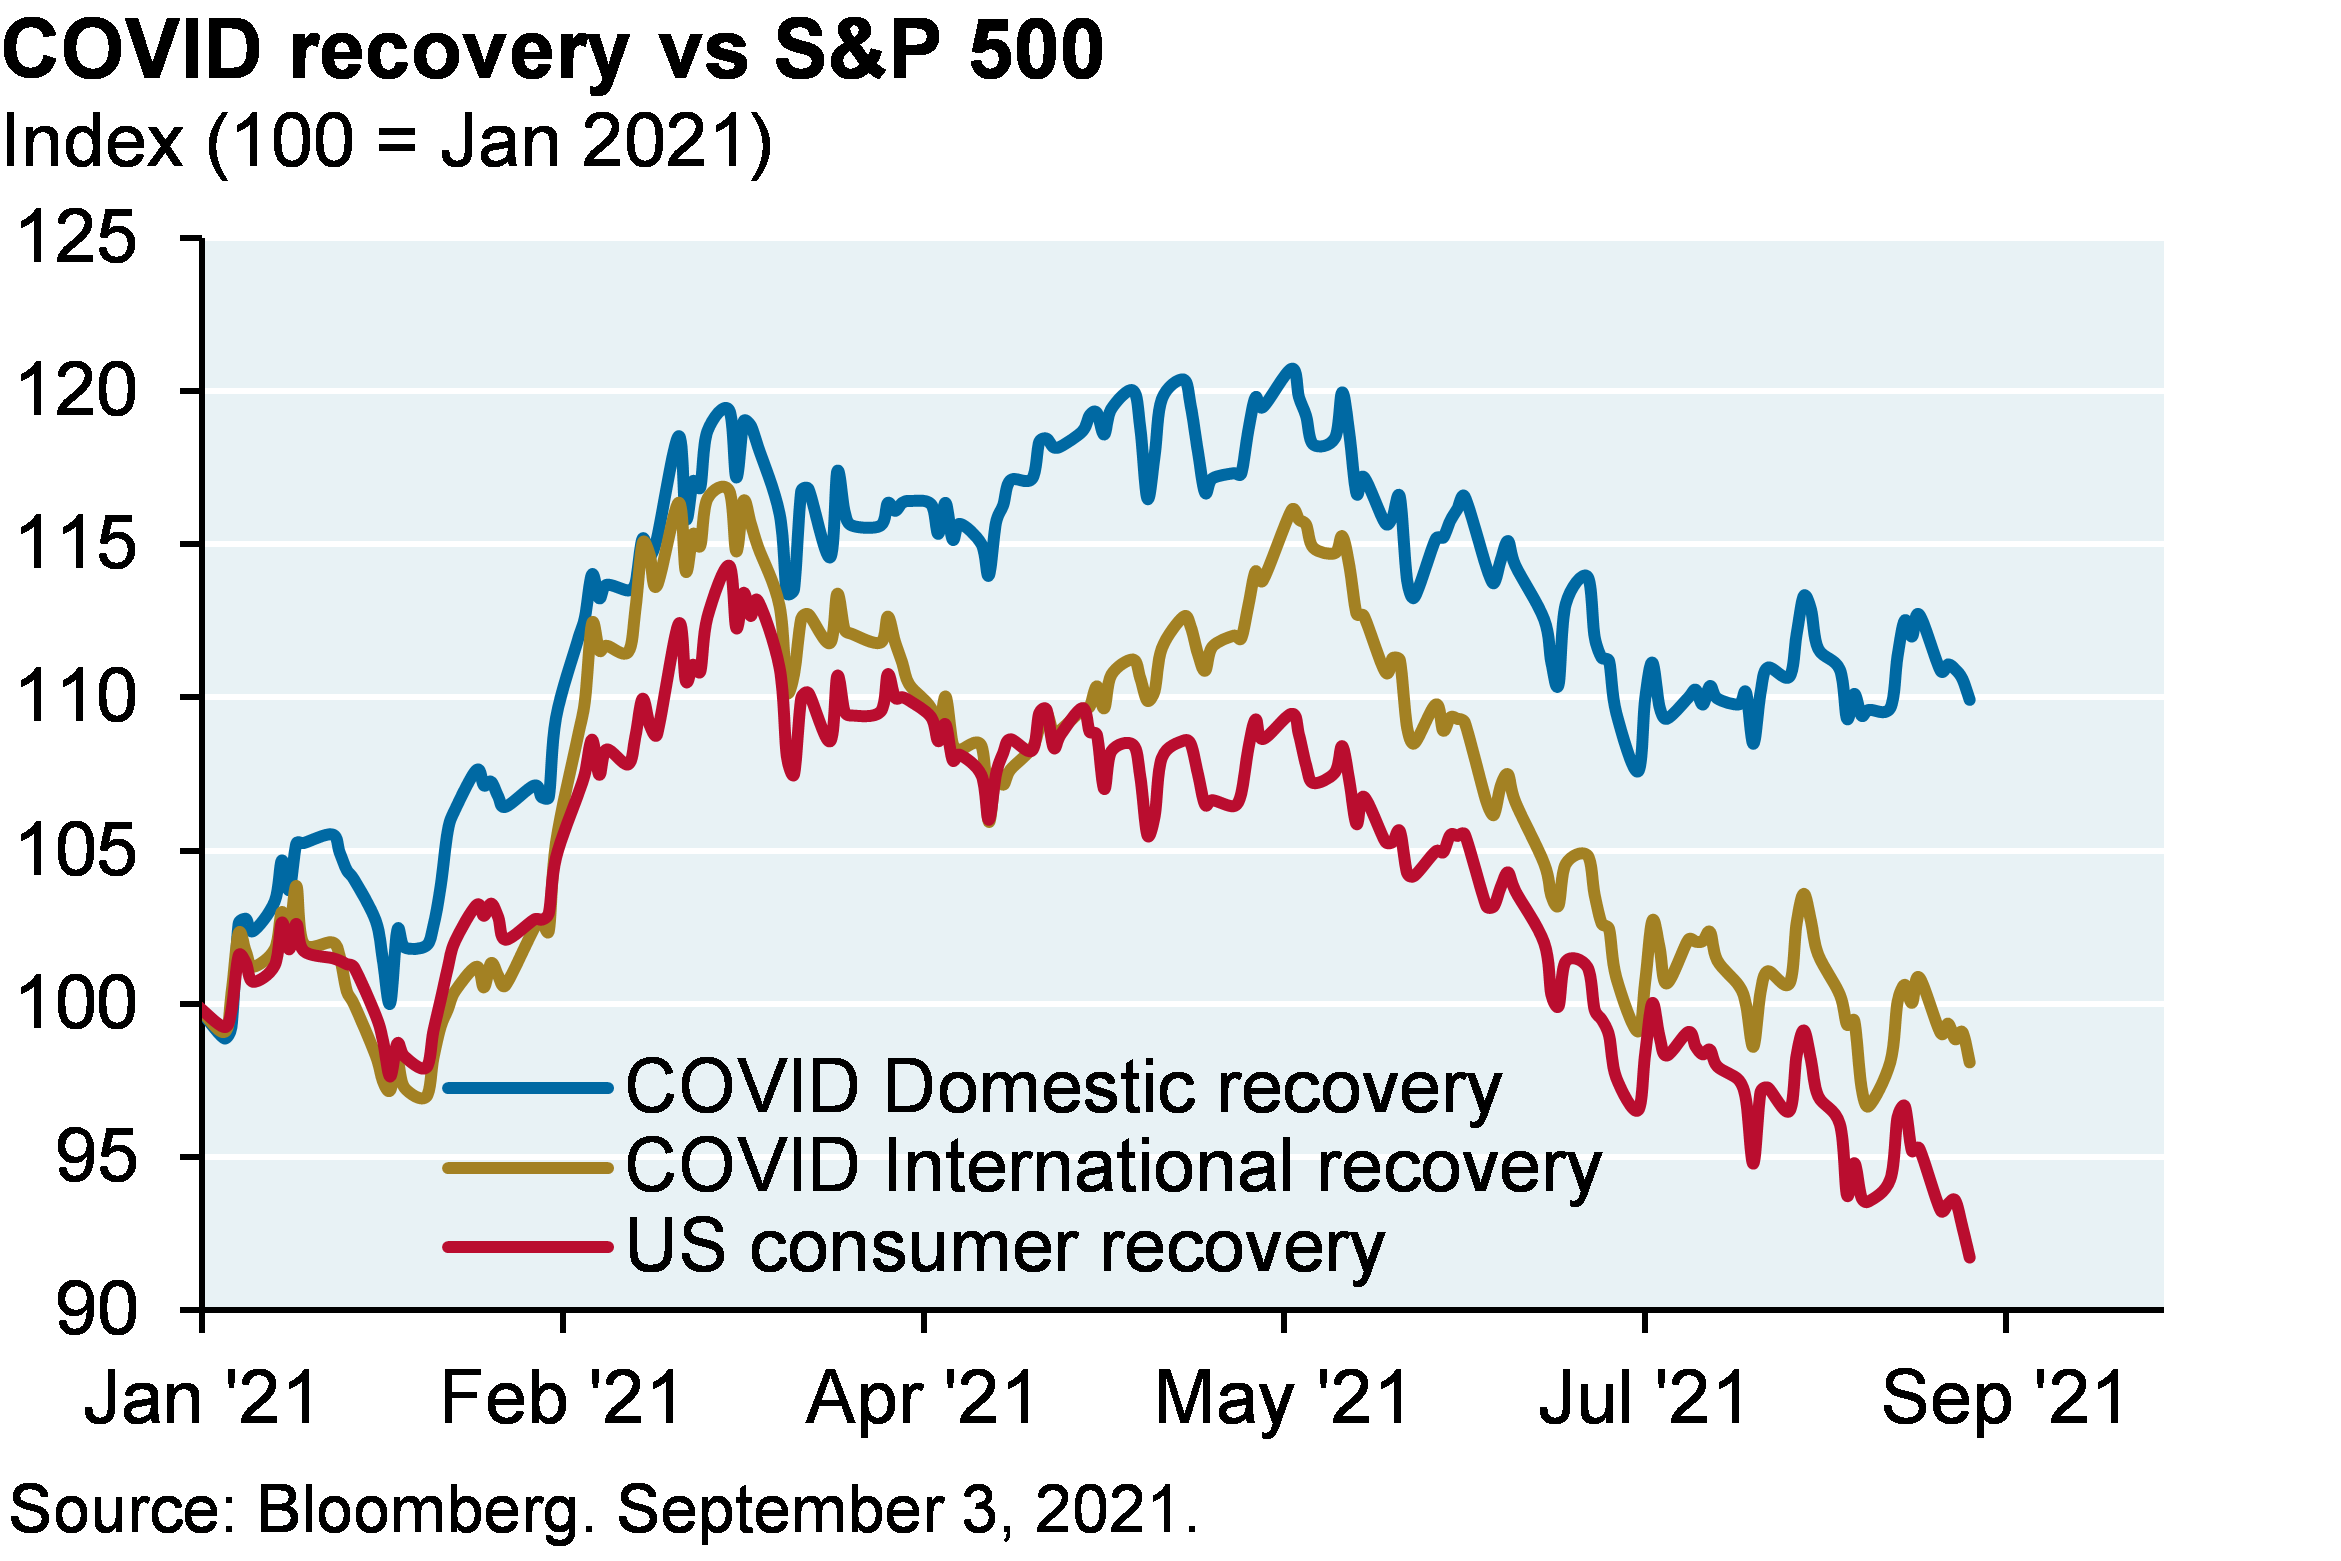 Line chart shows the COVID recovery vs S&P 500 shown as an index where 100 represents January 2021 levels. Chart shows the COVID domestic recovery is around 112, the COVID international recovery is at 100, and the US consumer recovery is around 95.